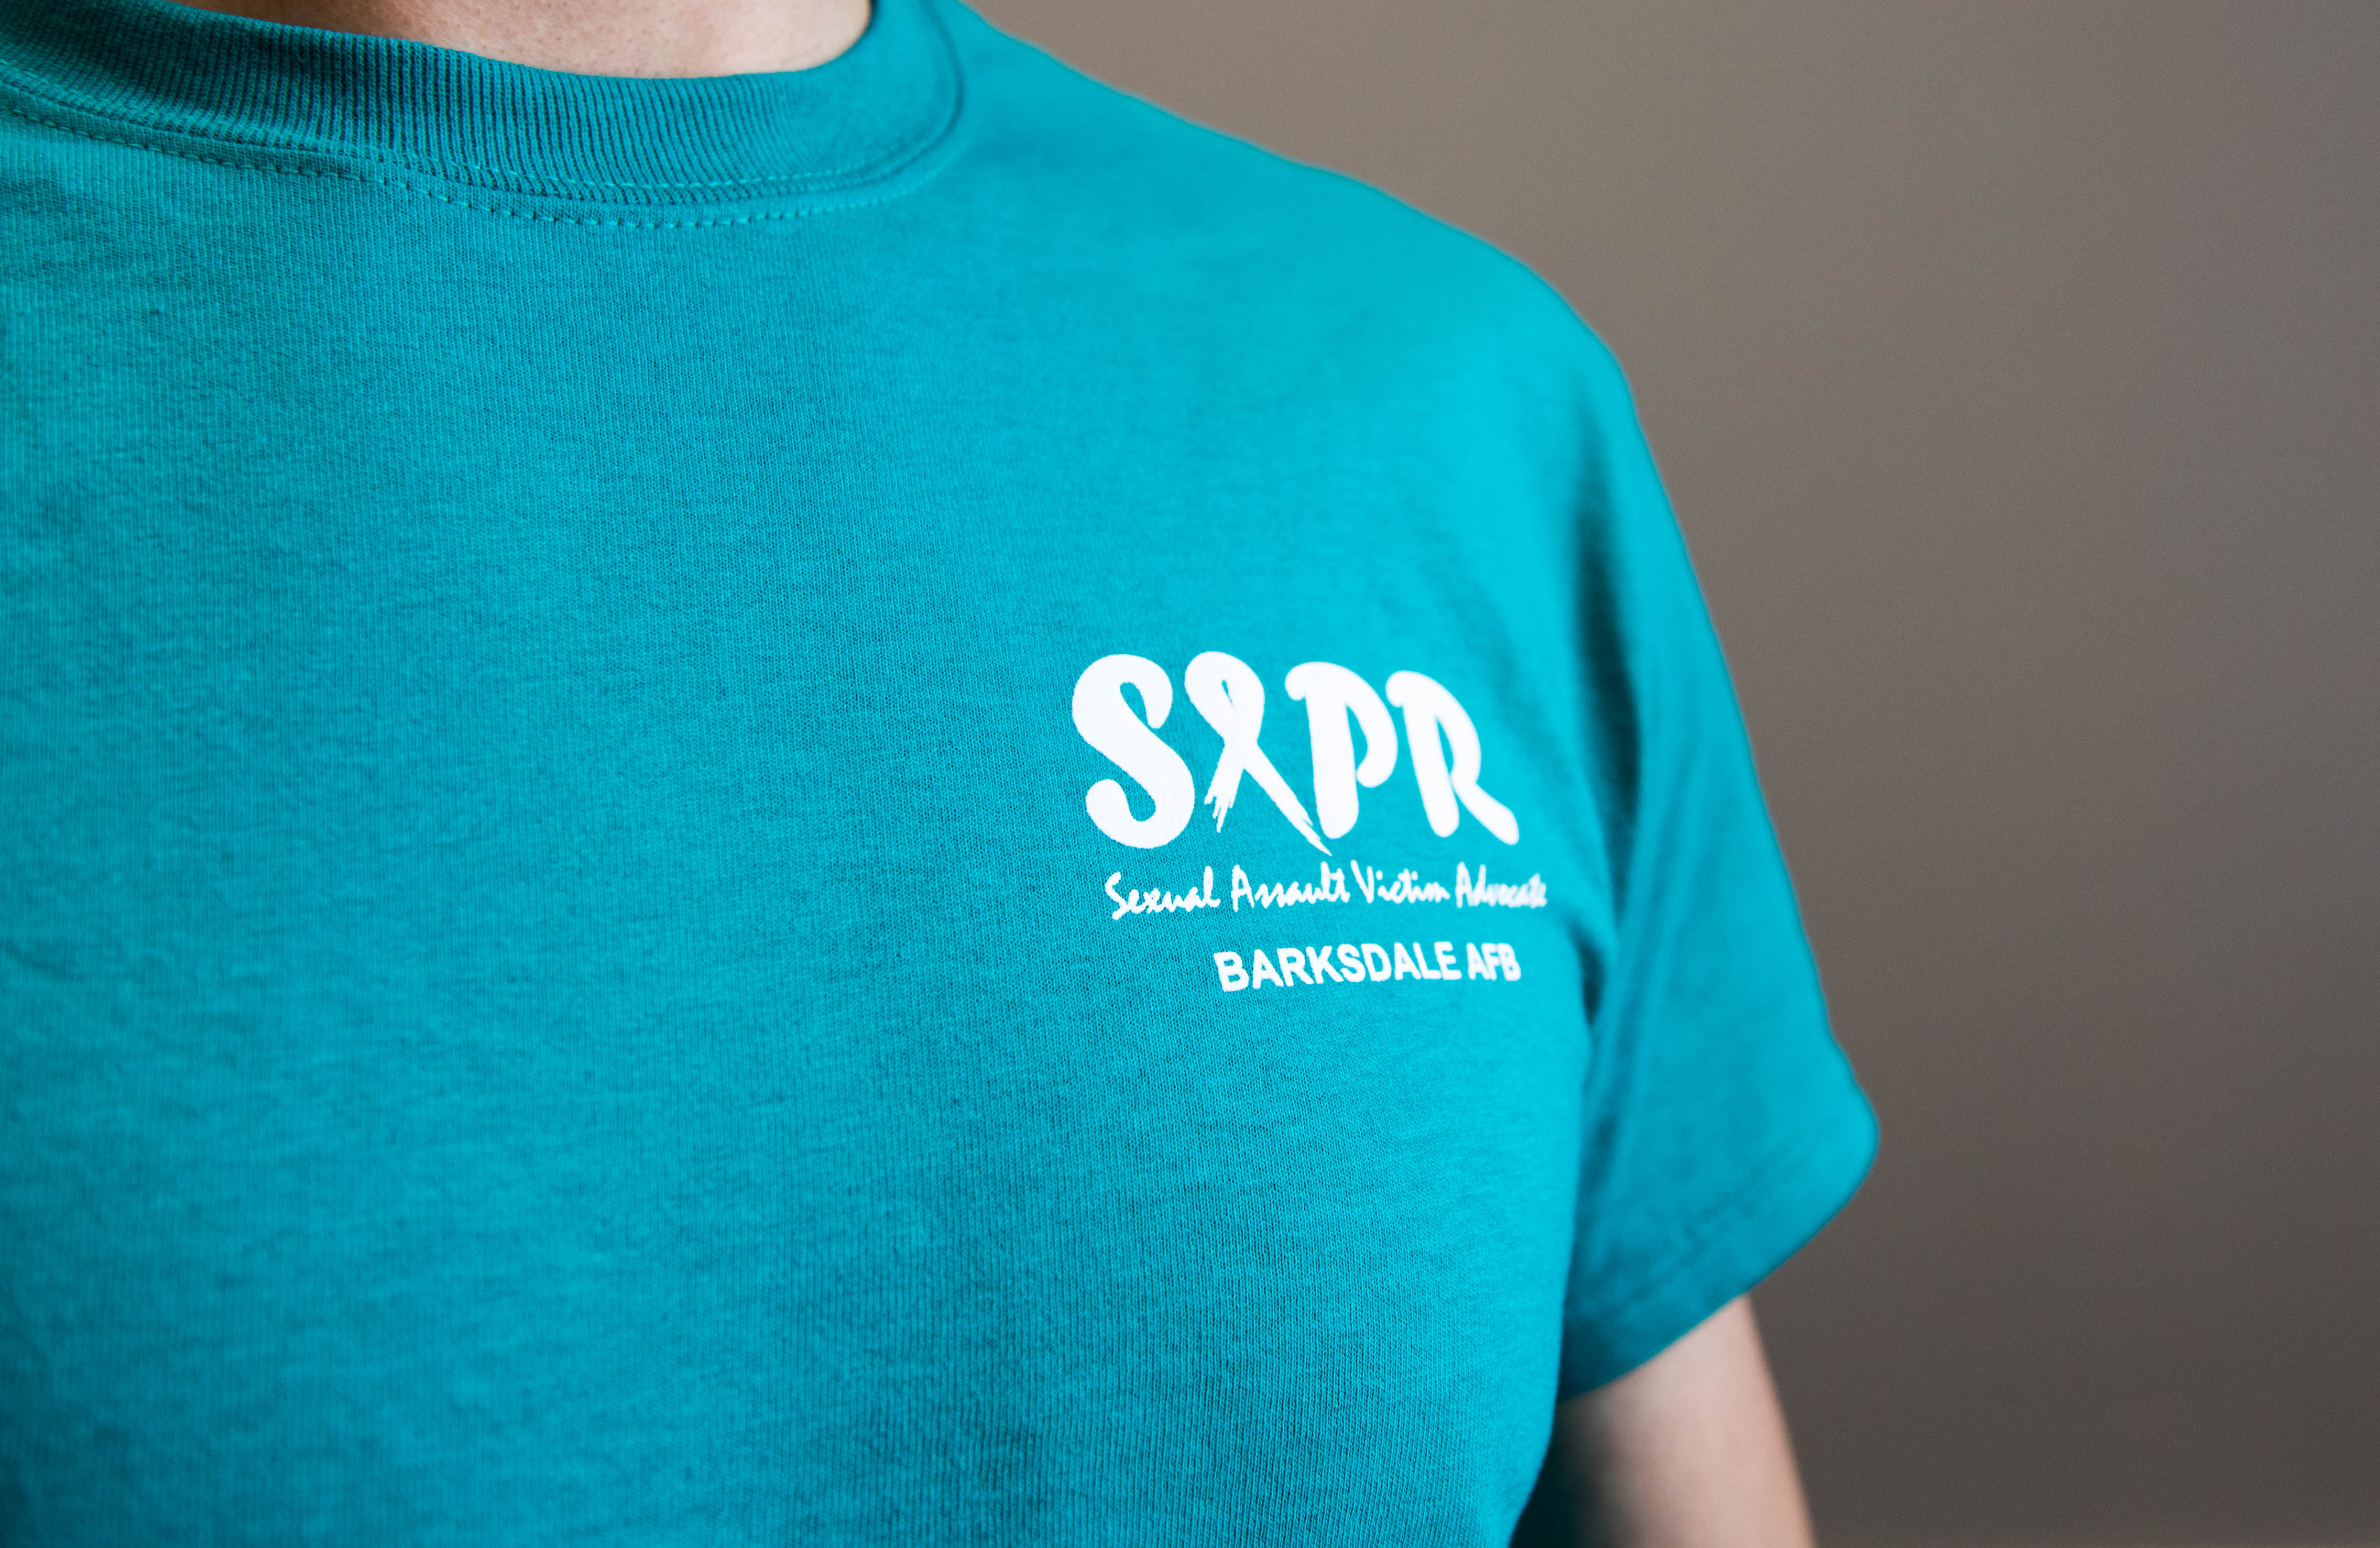 Tshirt with the SAPR logo on it